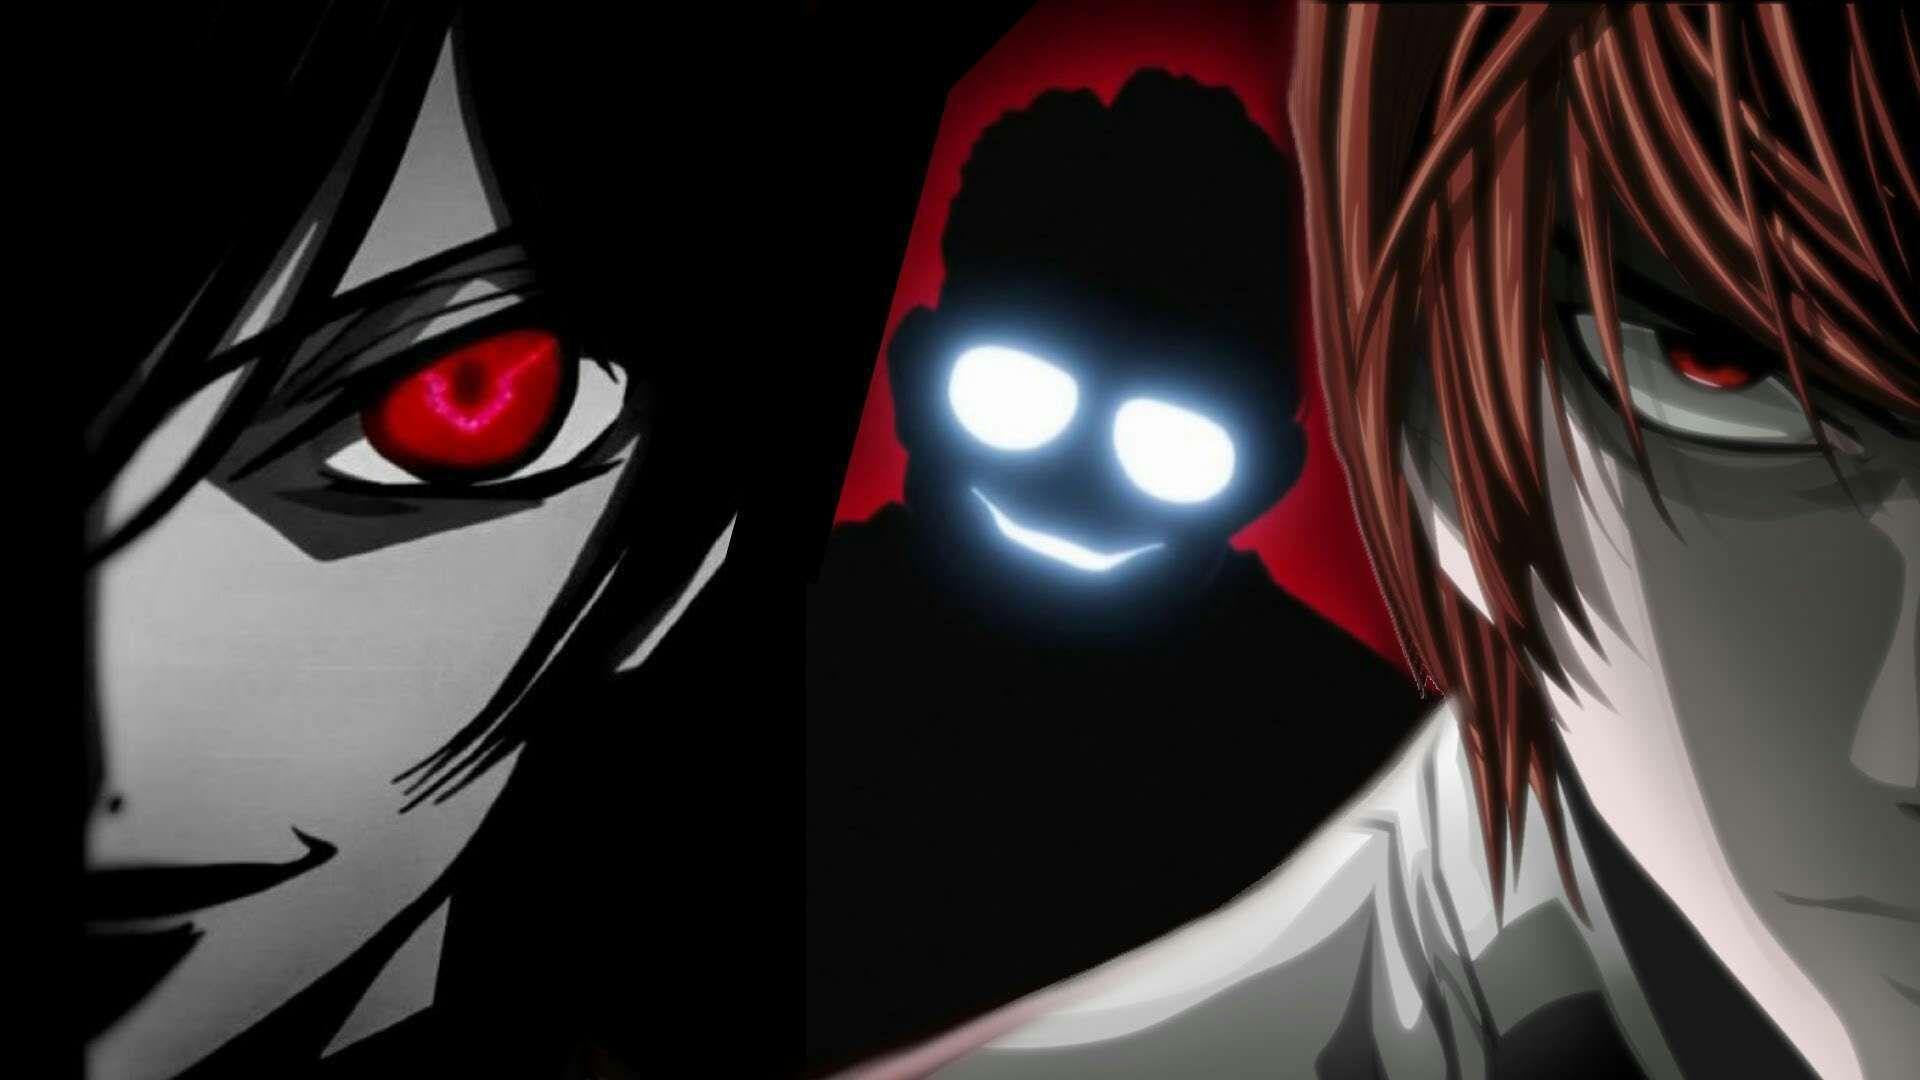 anime evil characters